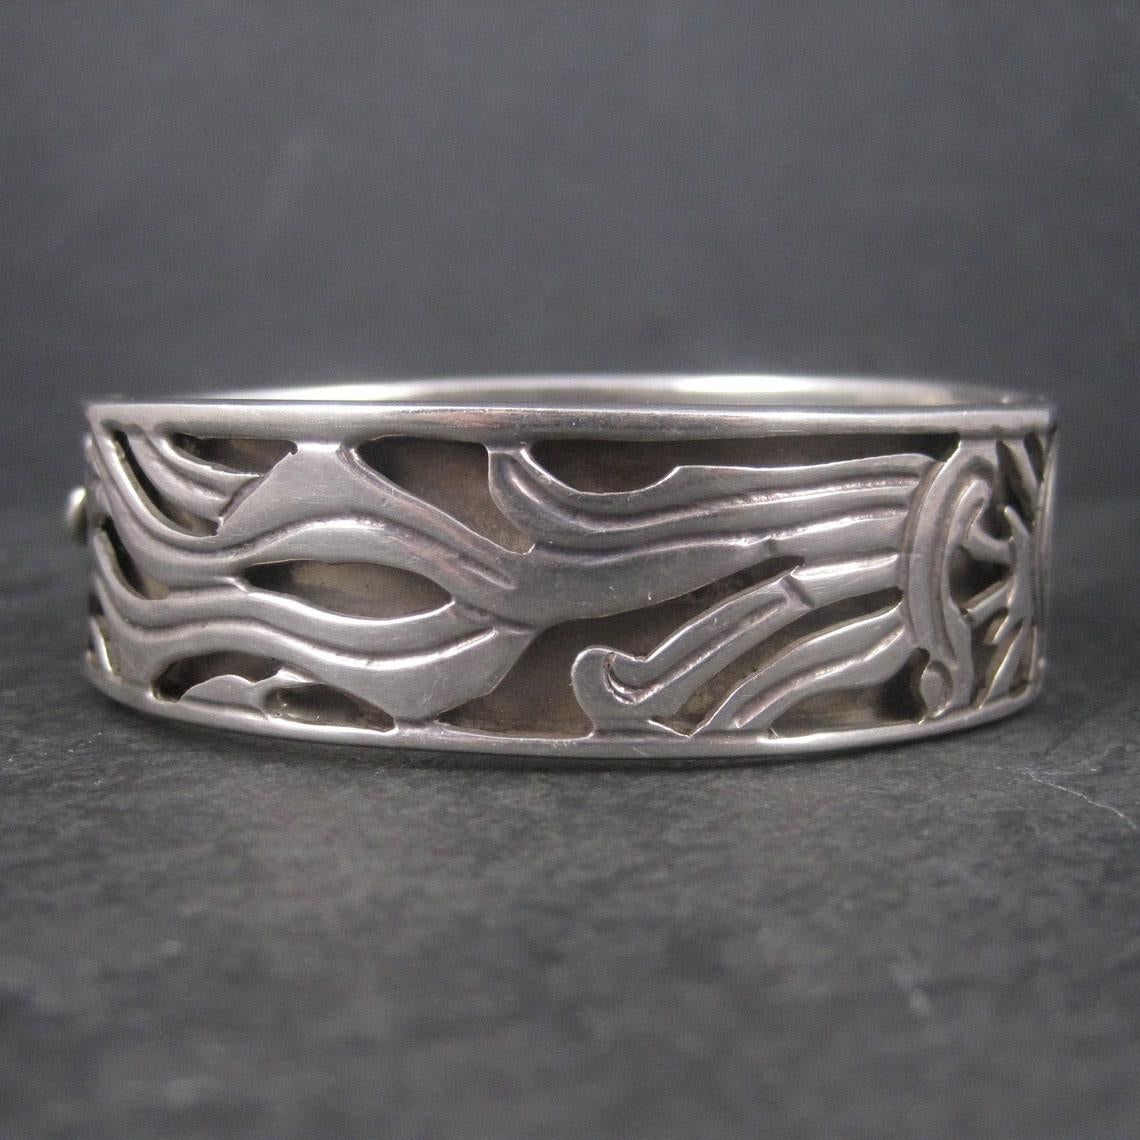 This gorgeous Mexican bracelet is sterling silver.
It features a beautiful sun with its rays.

This bracelet measures 13/16 of an inch wide.
It has an inner circumference of 6 3/4 inches.
Weight: 49.5 grams

Marks: ACT, TC-24, Taxco, Mexico,